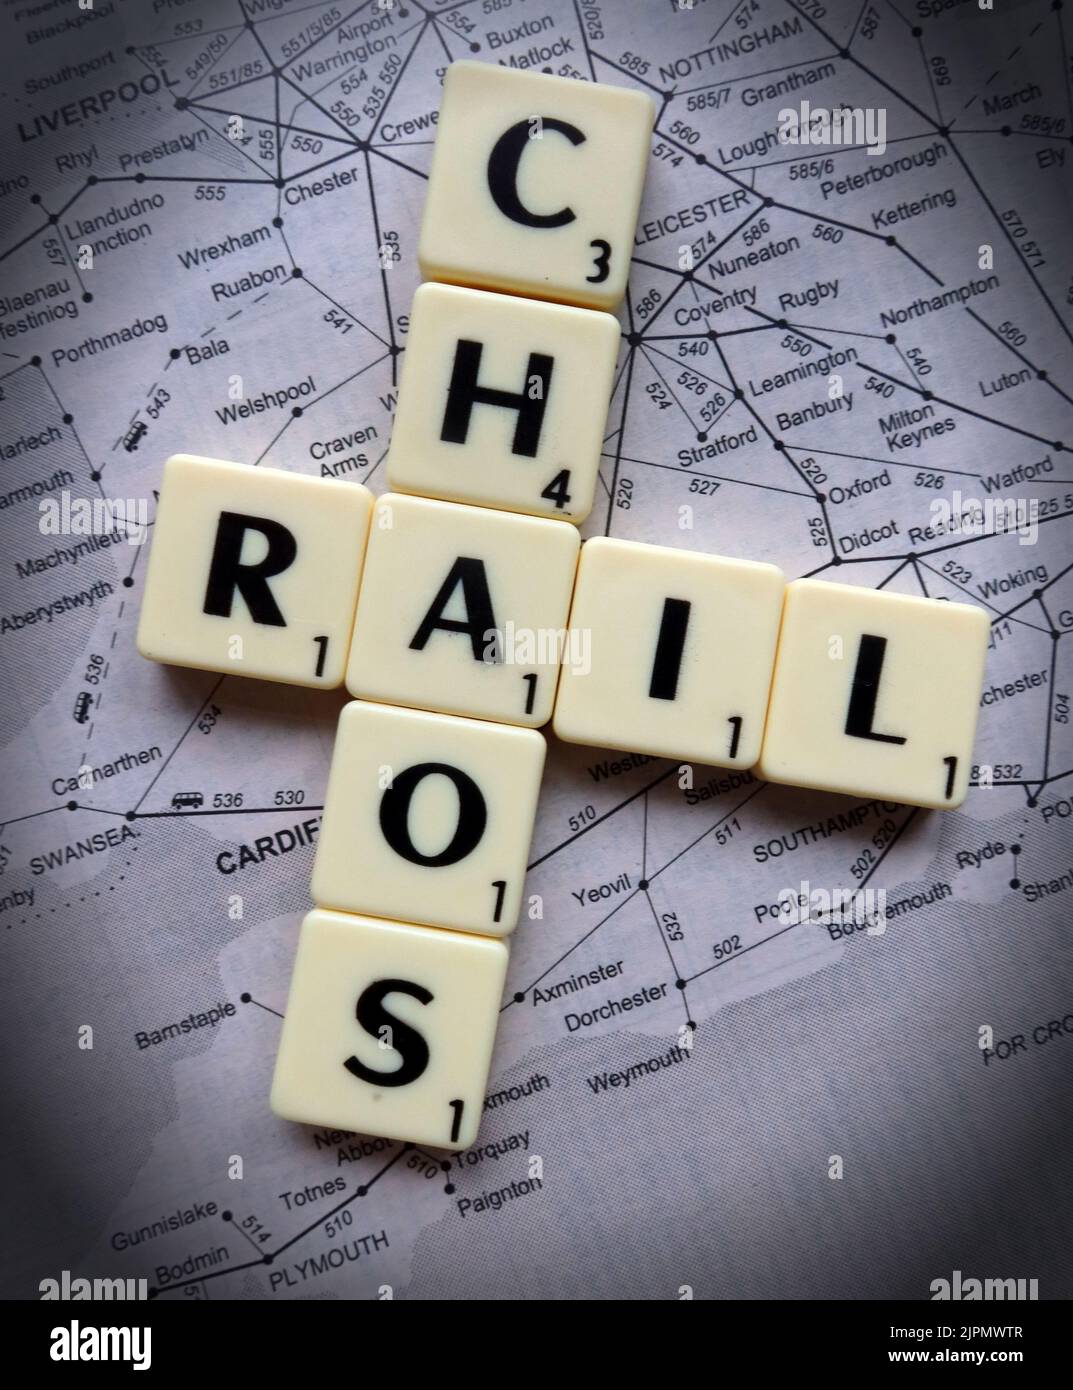 Rail chaos caused by delays, cancellations, strikes and industrial action, across the British train transport network - RMT, ASLEF in Scrabble letters Stock Photo